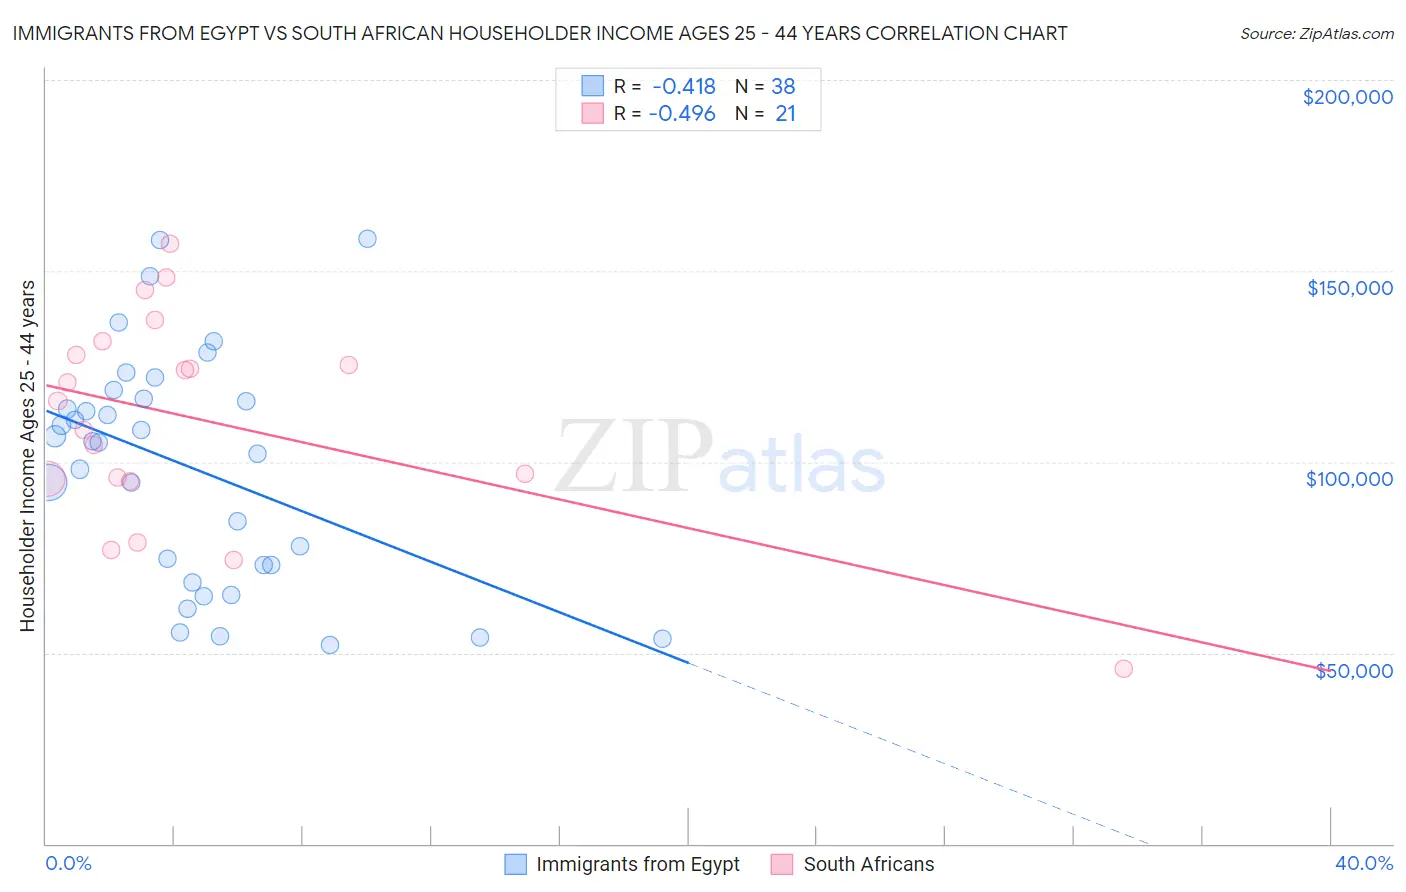 Immigrants from Egypt vs South African Householder Income Ages 25 - 44 years